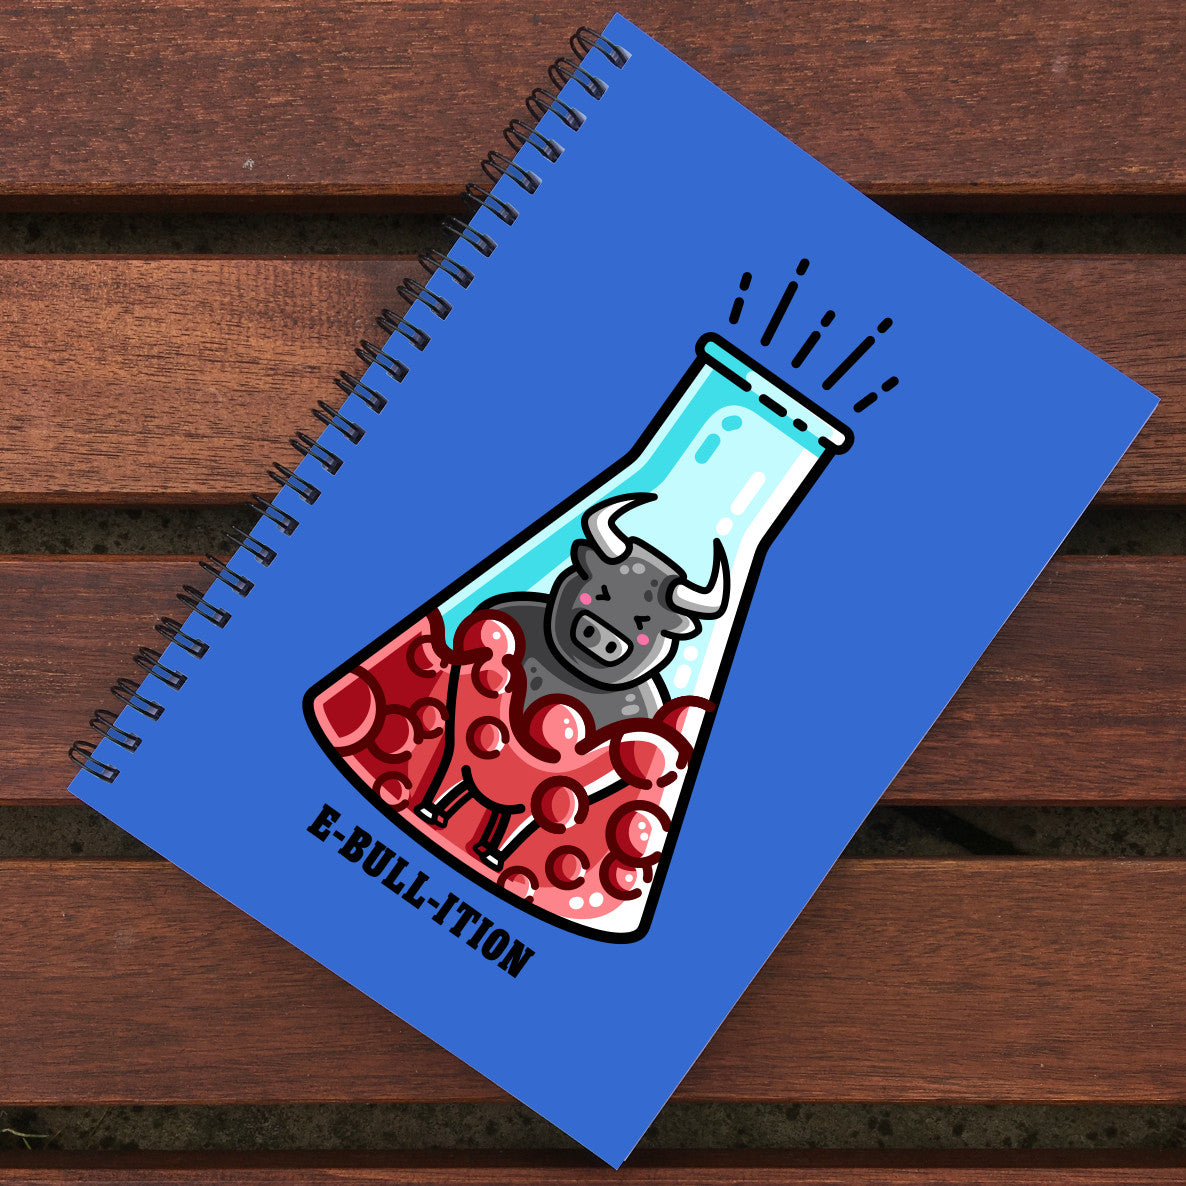 Blue notebook with black spiral binding lying on wooden slats, notebook design is of a kawaii cute bull in a boiling flask of red liquid with 'e-bull-ition' beneath.